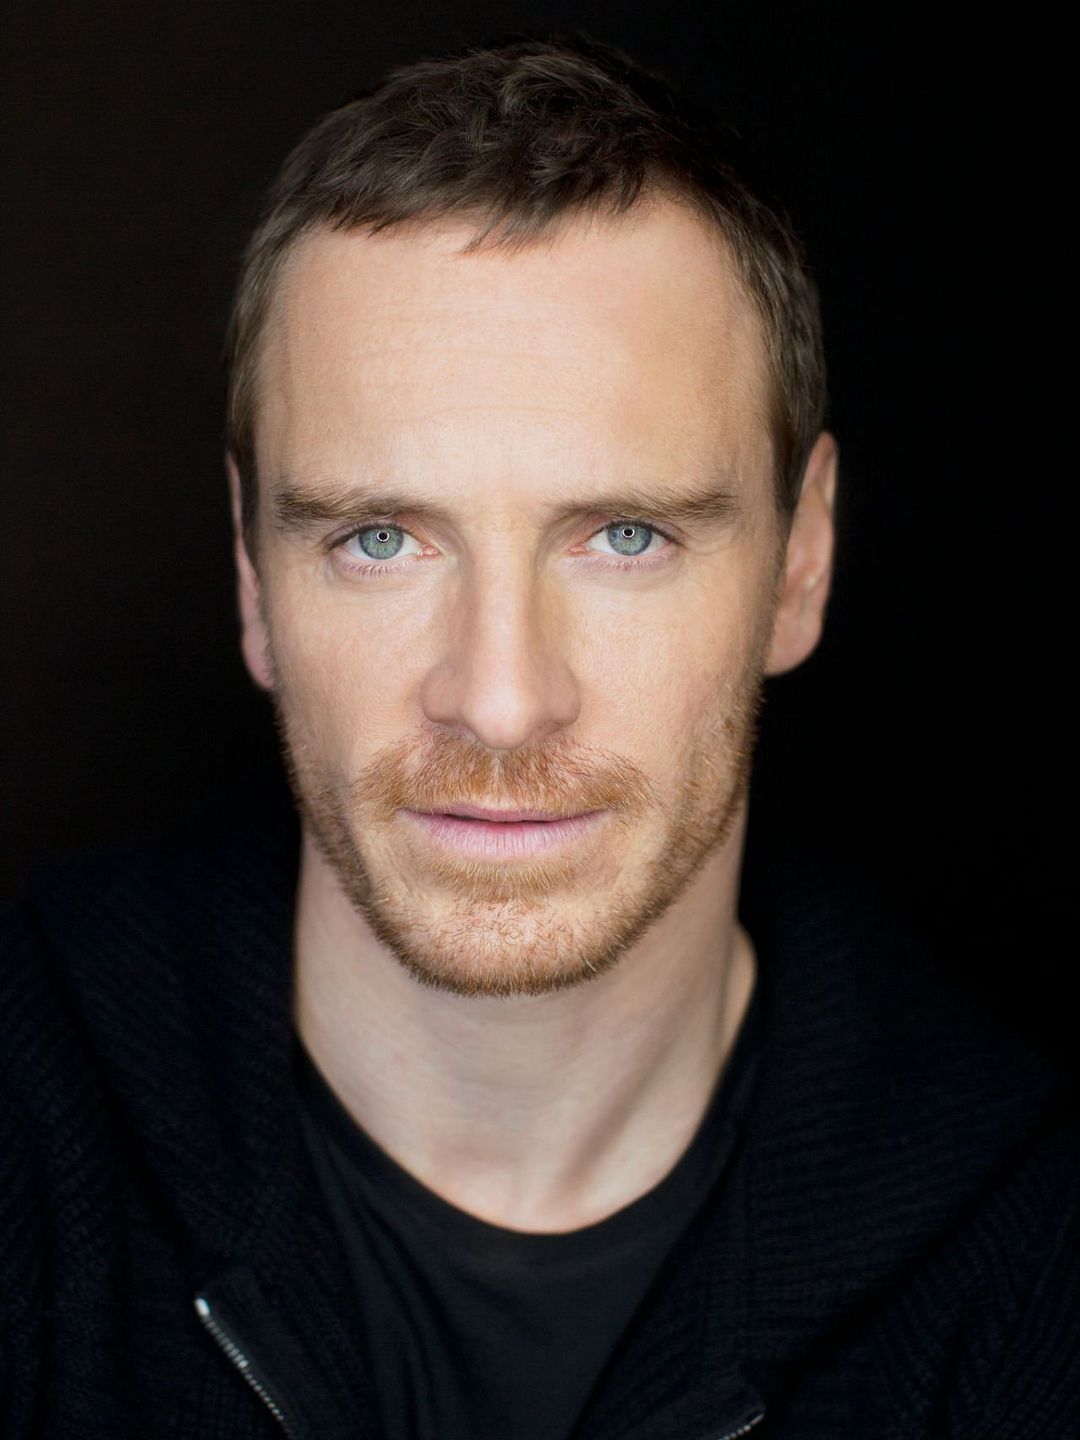 Michael Fassbender does he have a wife